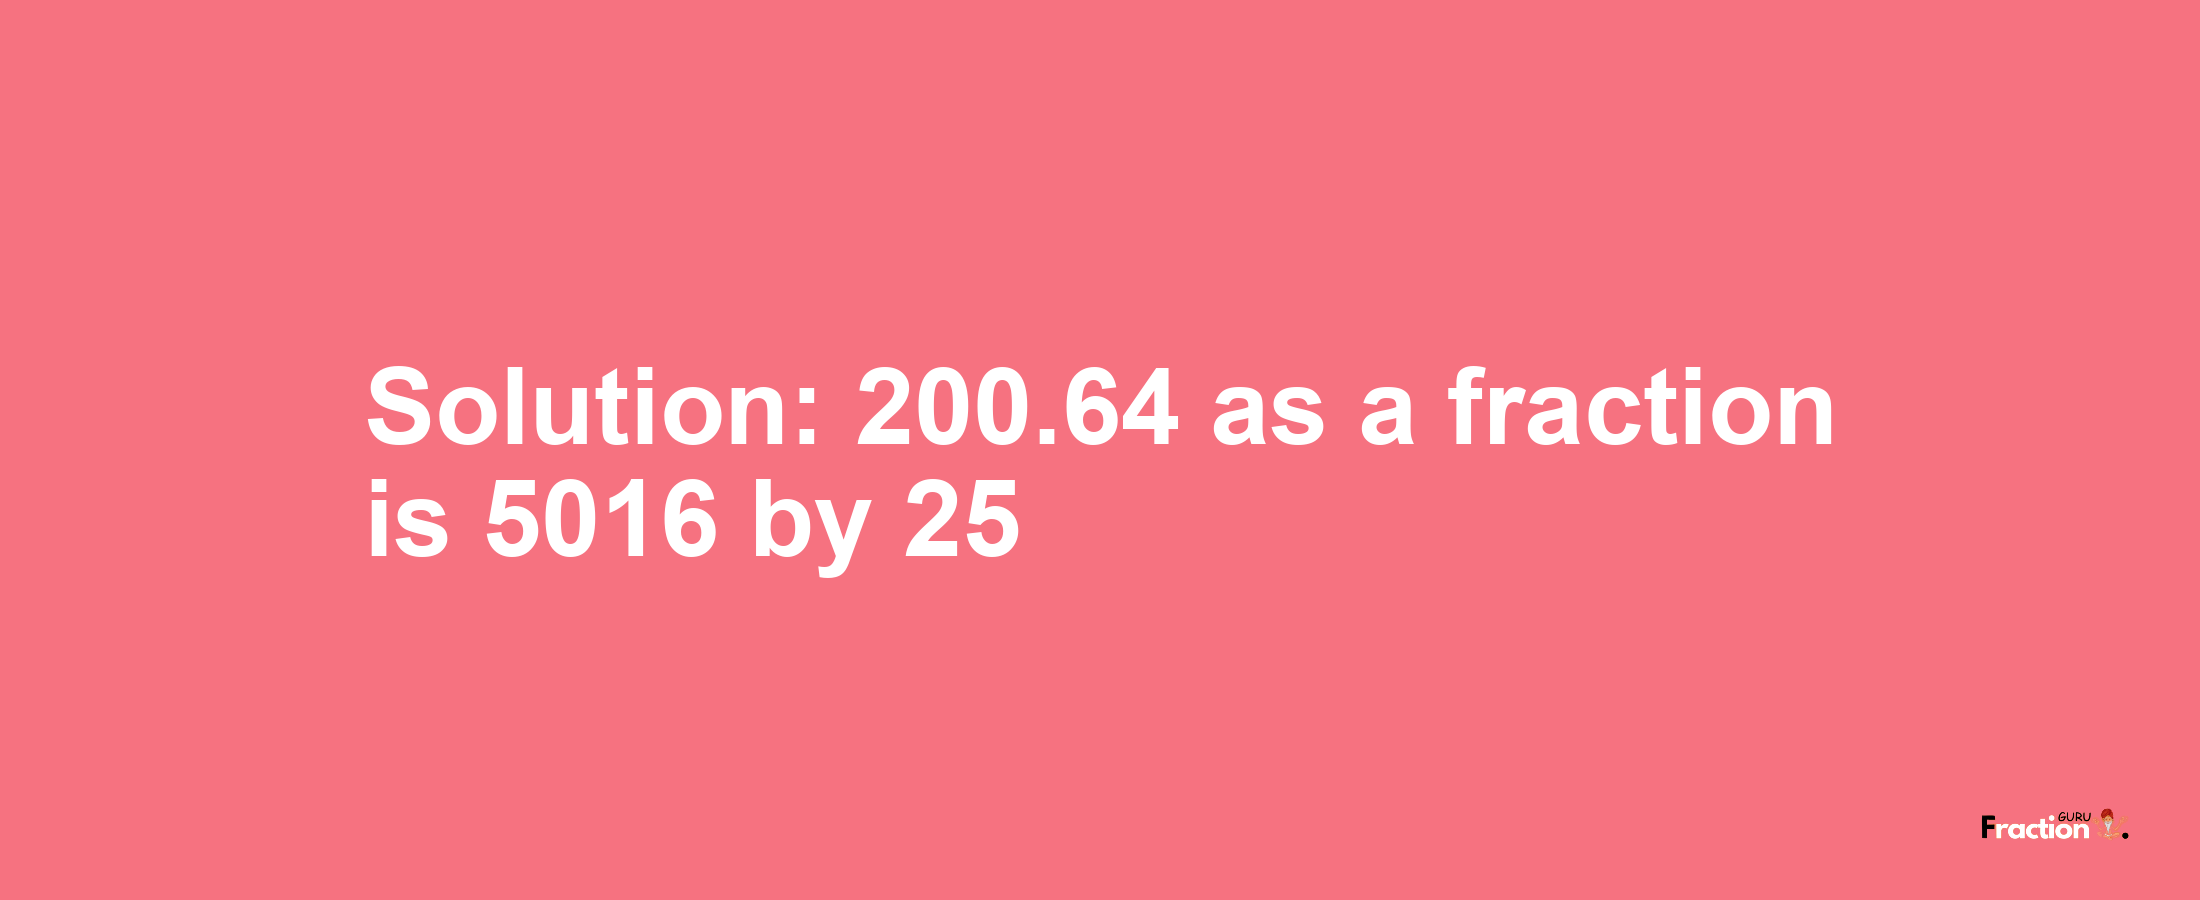 Solution:200.64 as a fraction is 5016/25